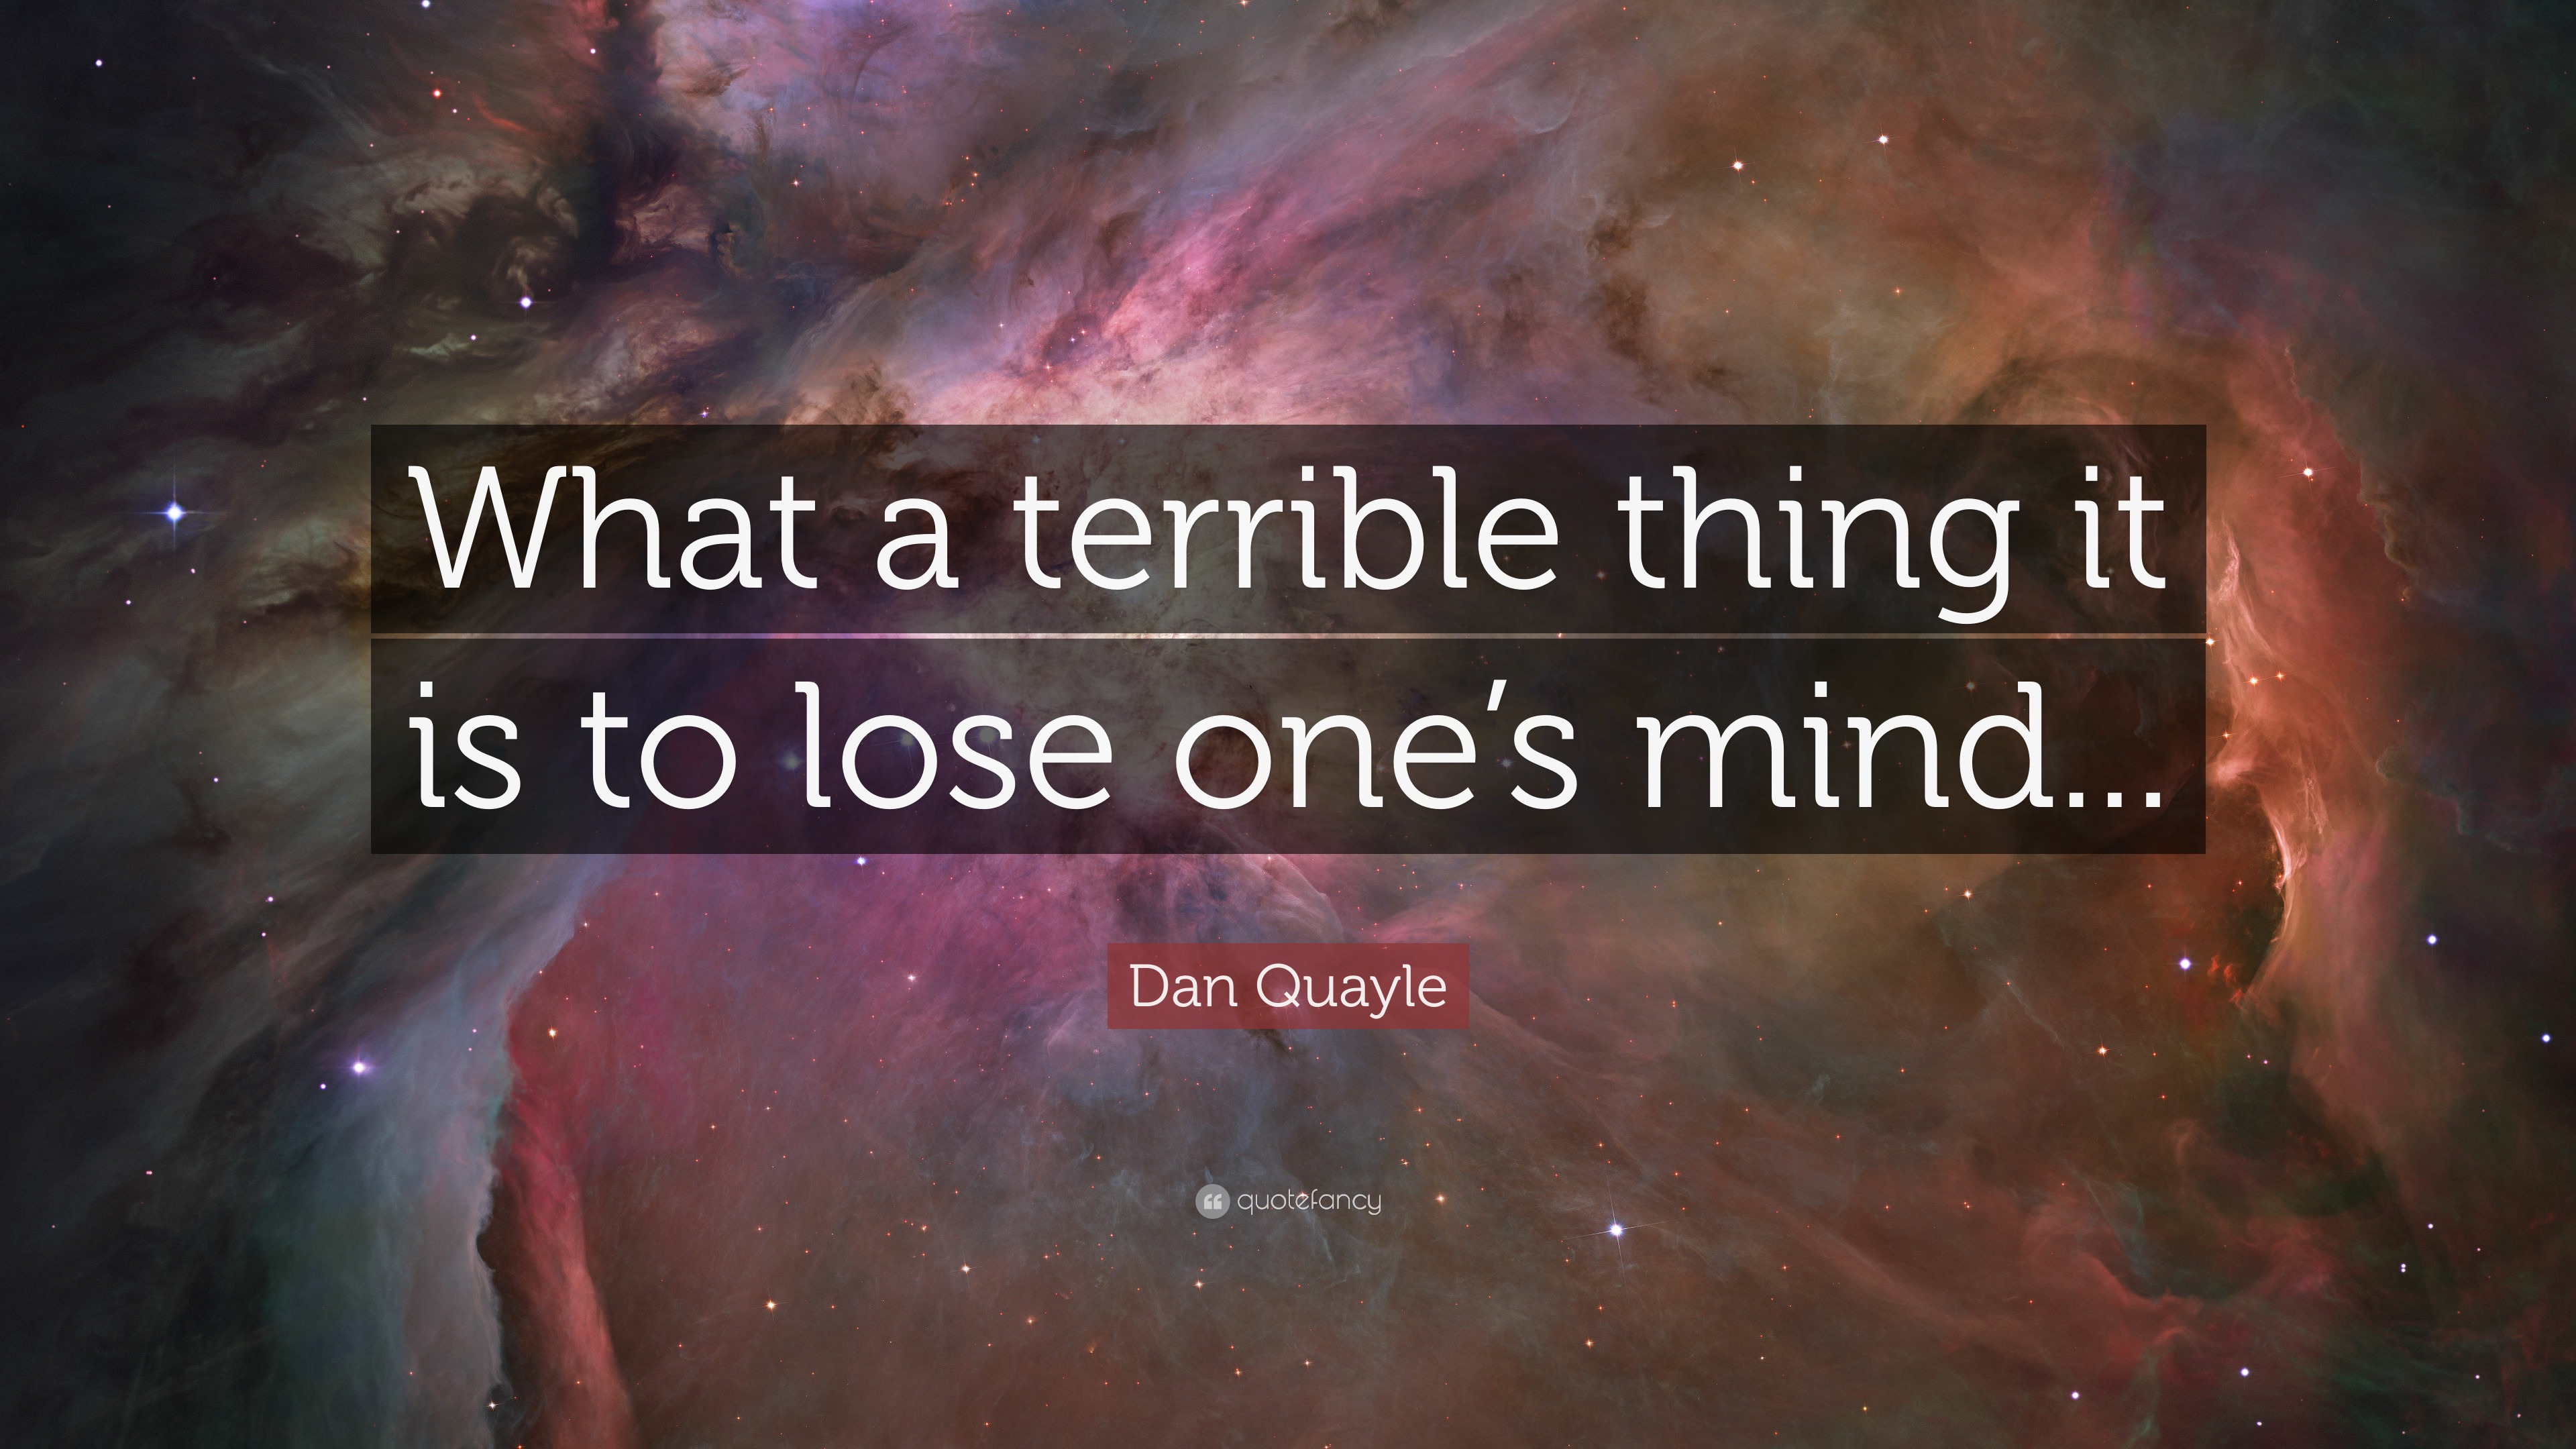 Dan Quayle Quote: "What a terrible thing it is to lose one's mind..." (7 wallpapers) - Quotefancy